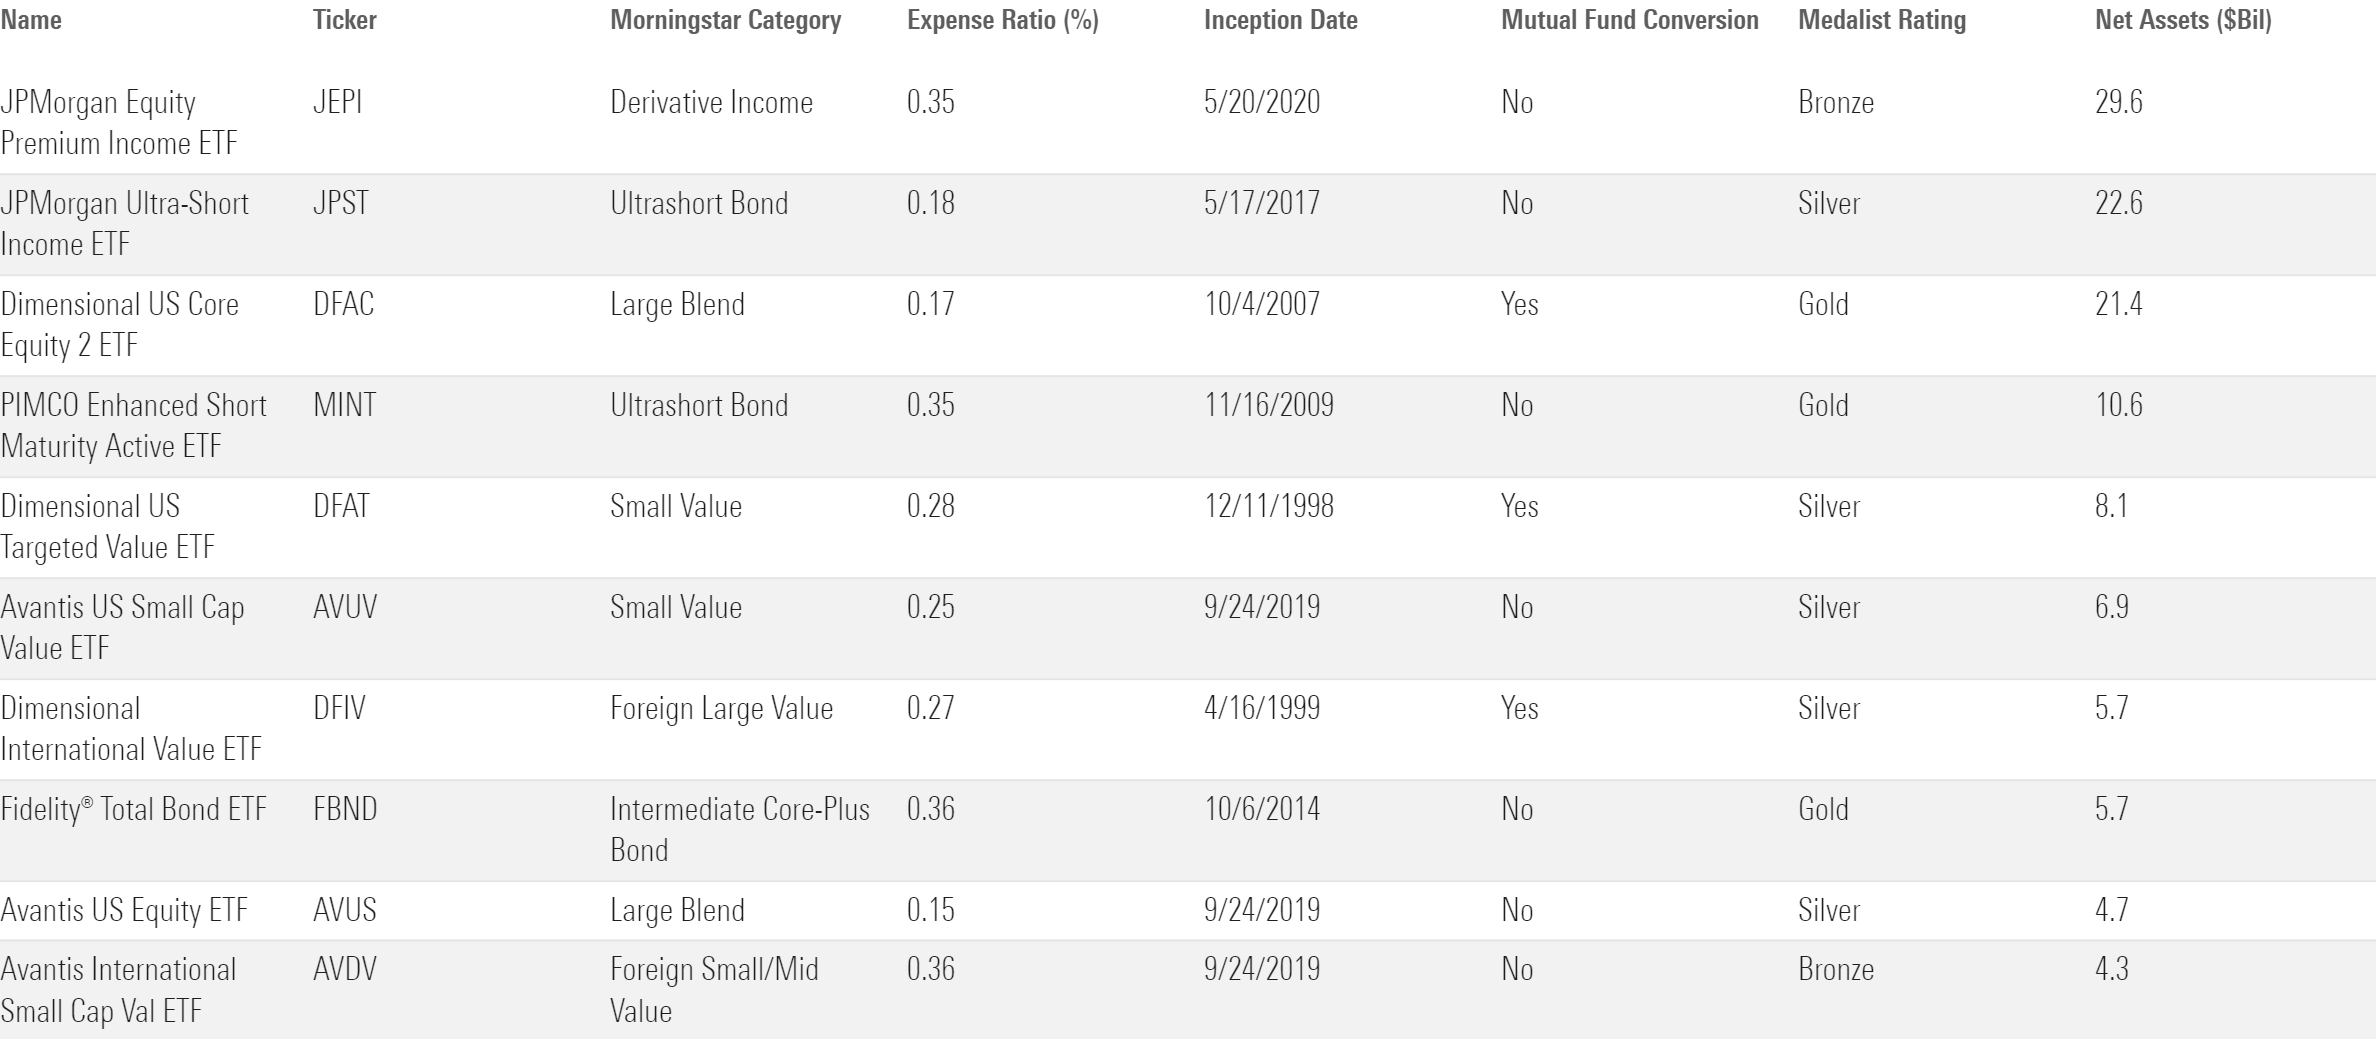 Table listing the 10 largest active ETFs covered by Morningstar analysts.